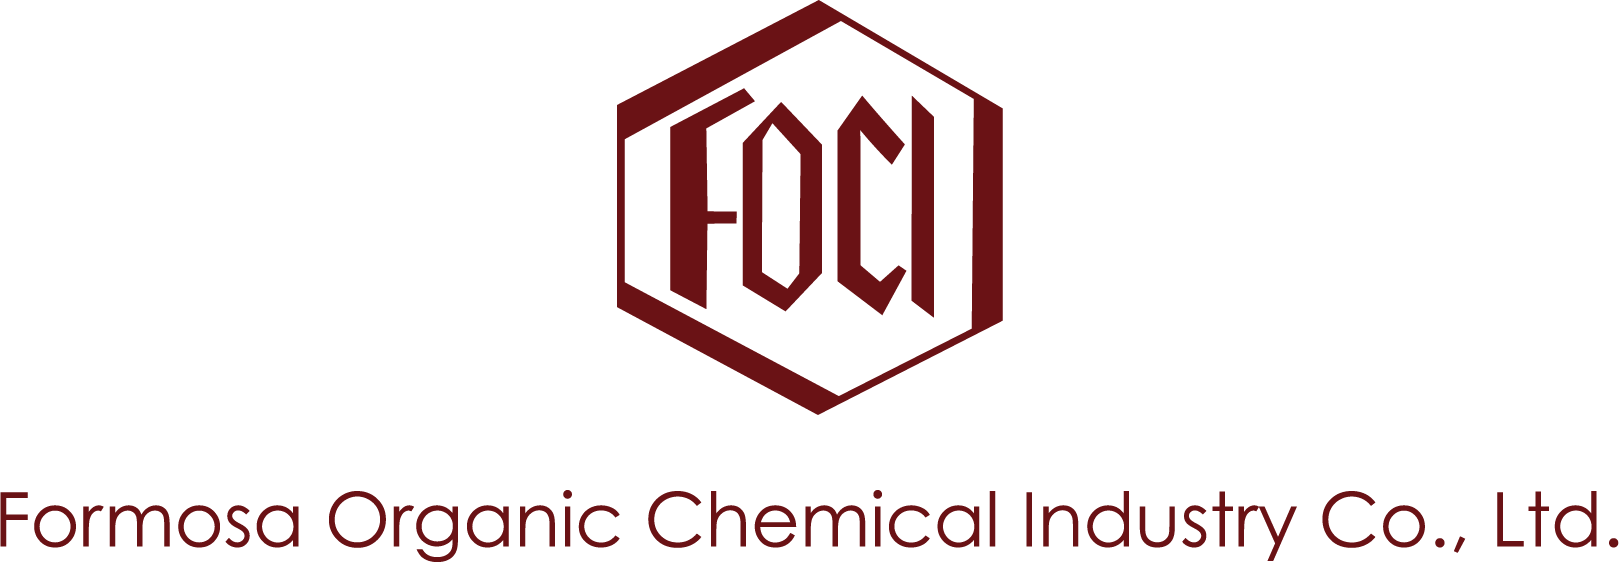 Formosa Organic Chemical Industry Company Limited